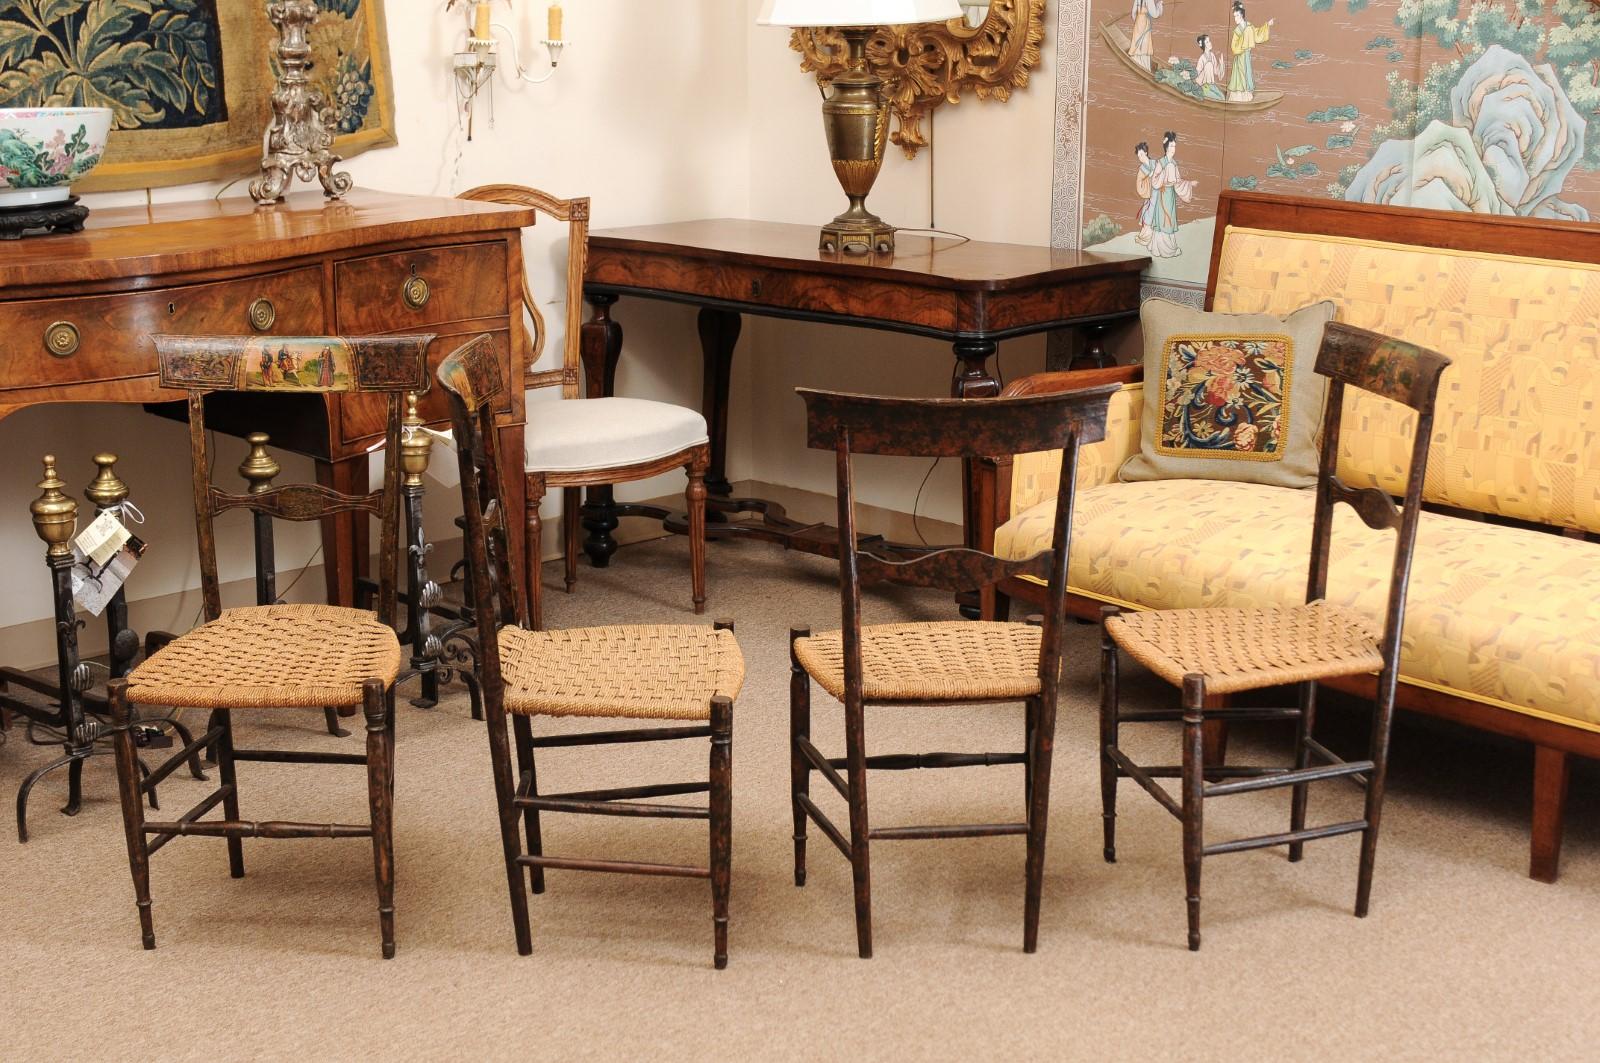 Pair of Neoclassical Black Painted Side Chairs with Woven Seats, Italy ca. 1790 For Sale 3